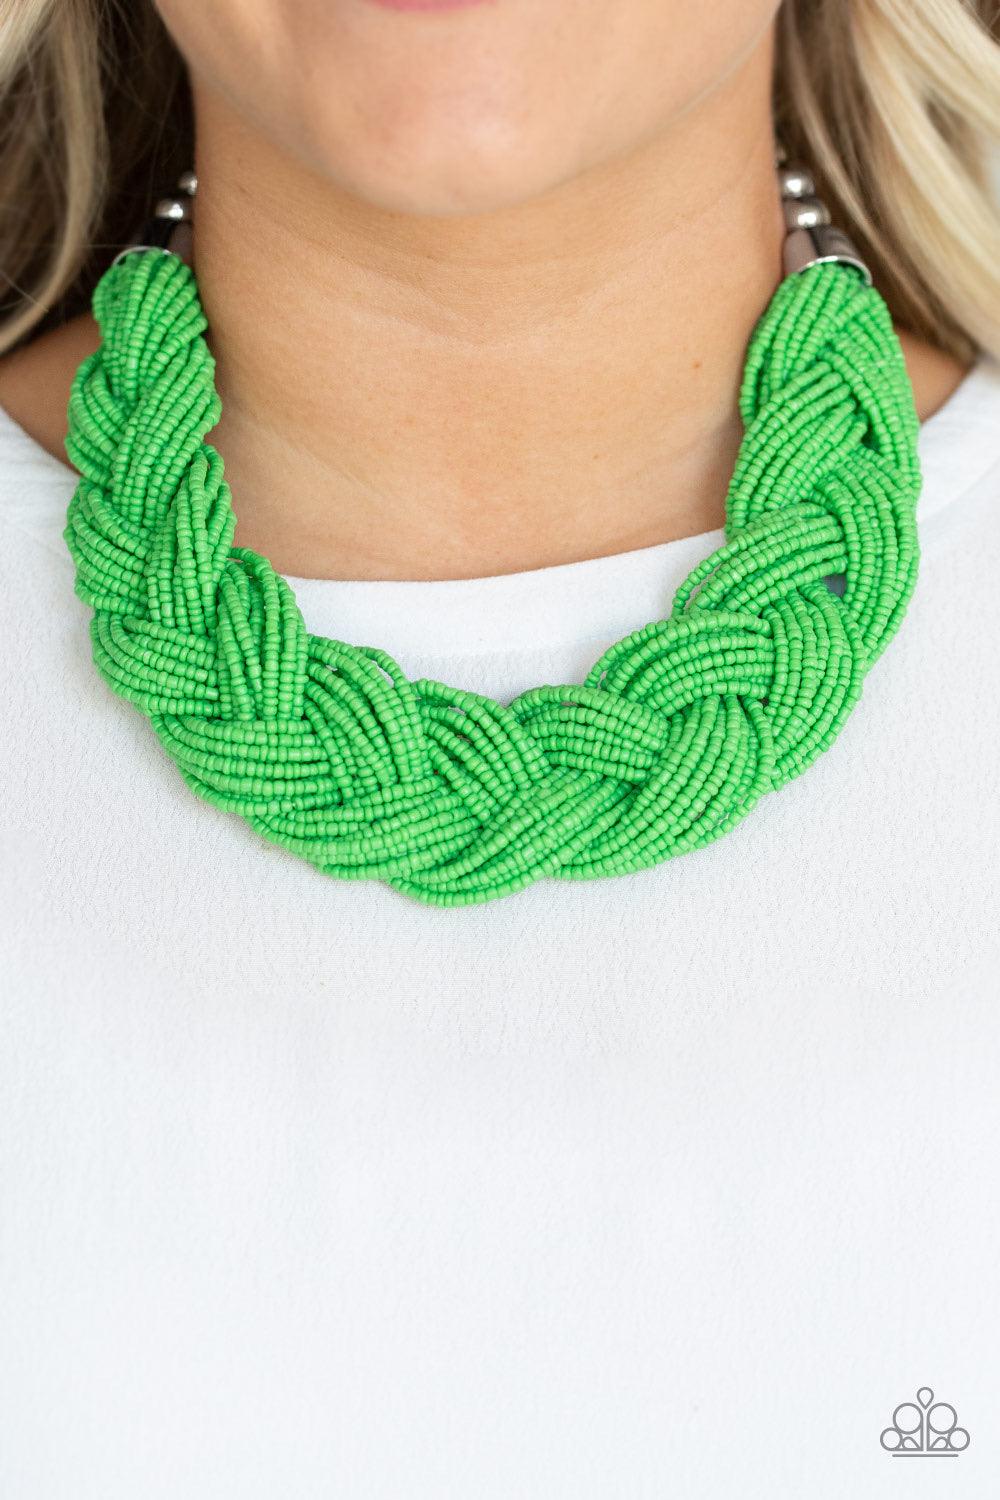 Paparazzi Accessories The Great Outback - Green Brushed in an energetic green hue, countless seed beads weave into an indigenous braid below the collar. The colorful strands attach to large silver beads, adding a hint of metallic shimmer to the playful de